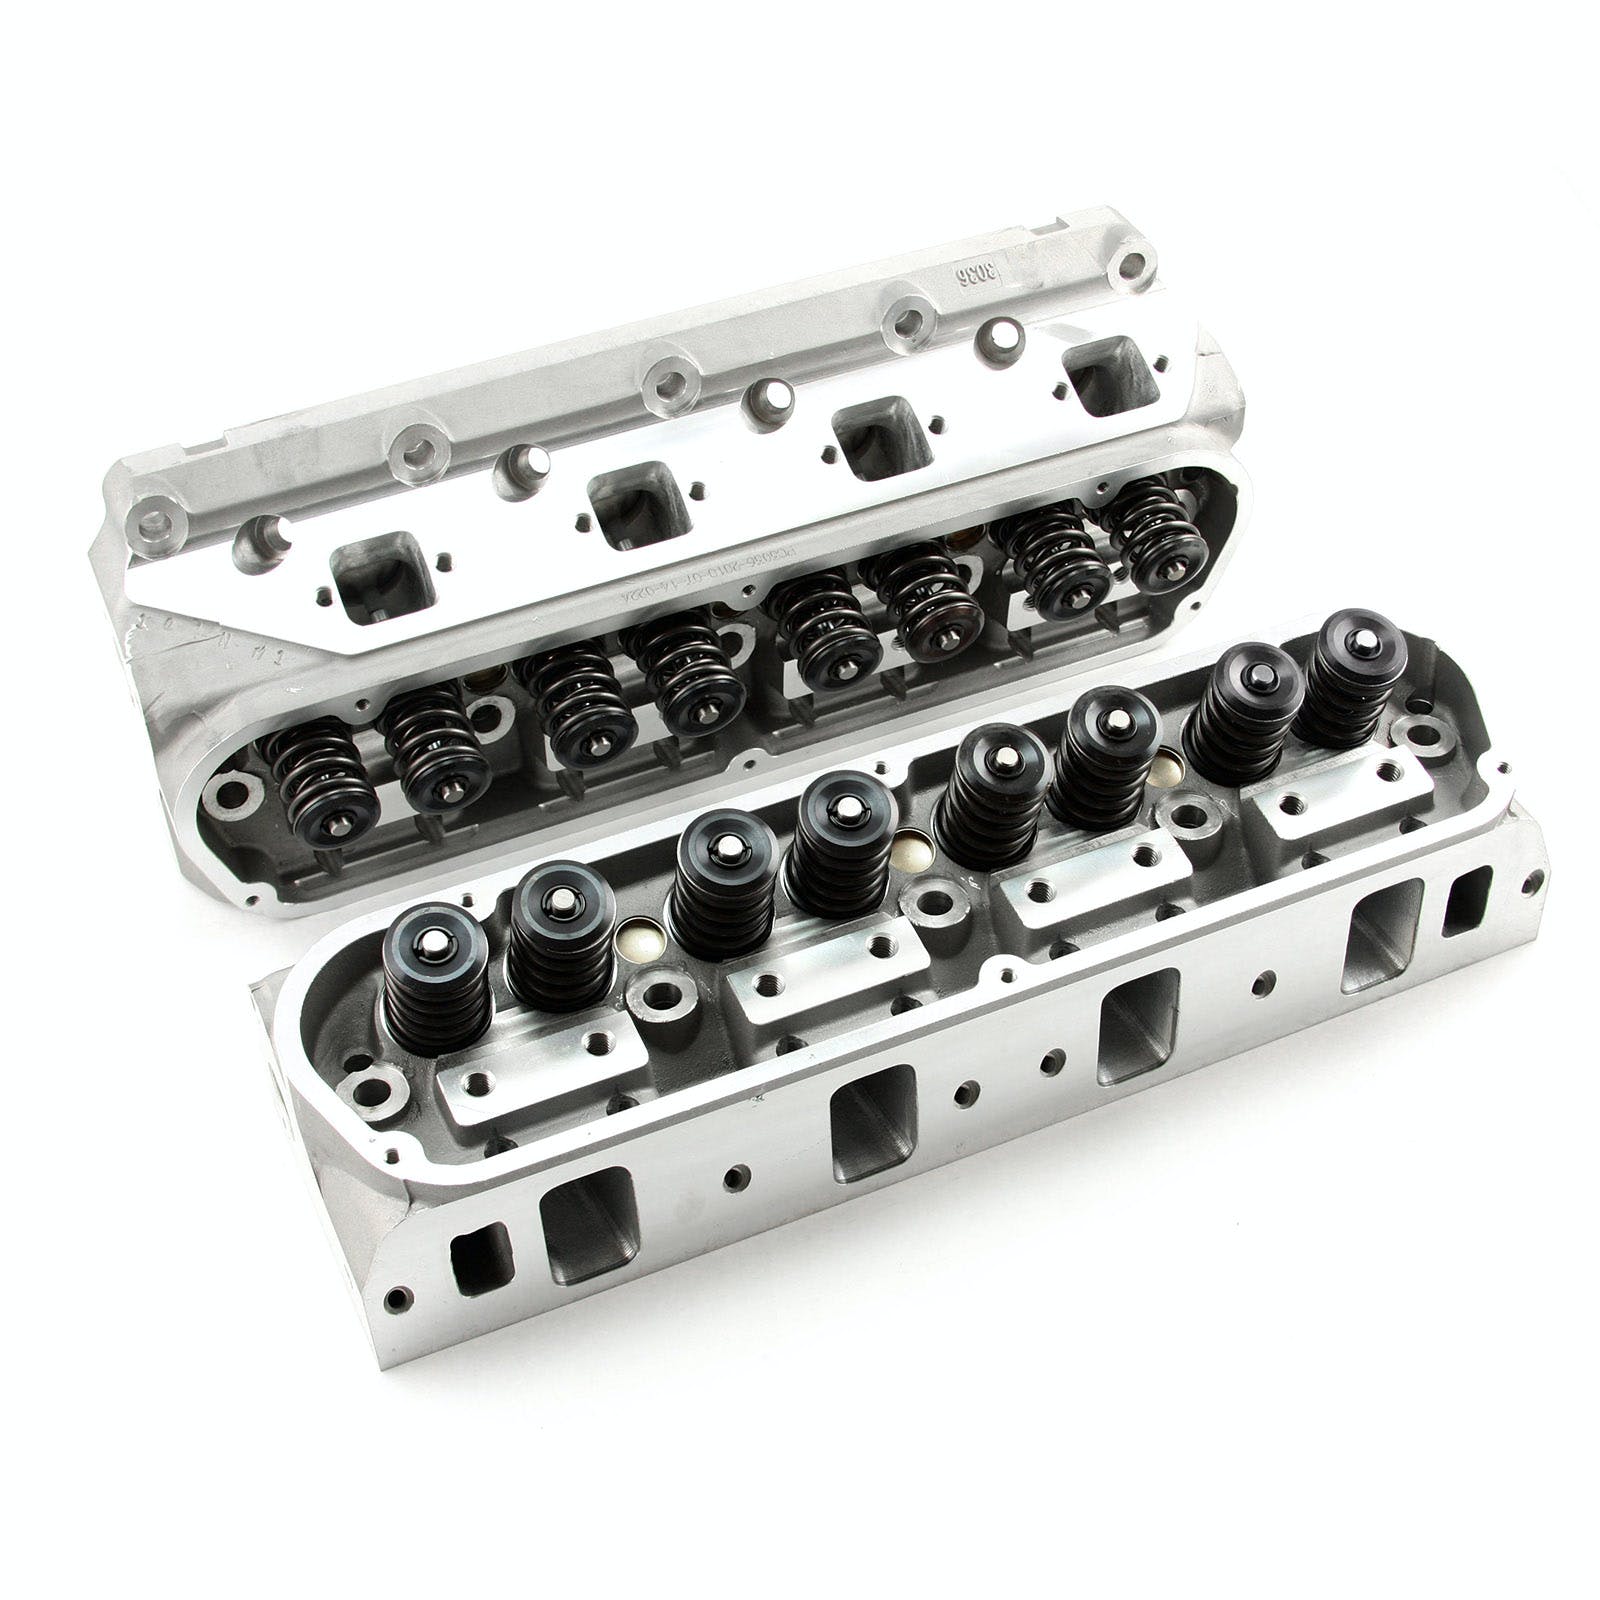 Speedmaster PCE281.2047 190cc 62cc Solid-FT Complete Aluminum Cylinder Heads